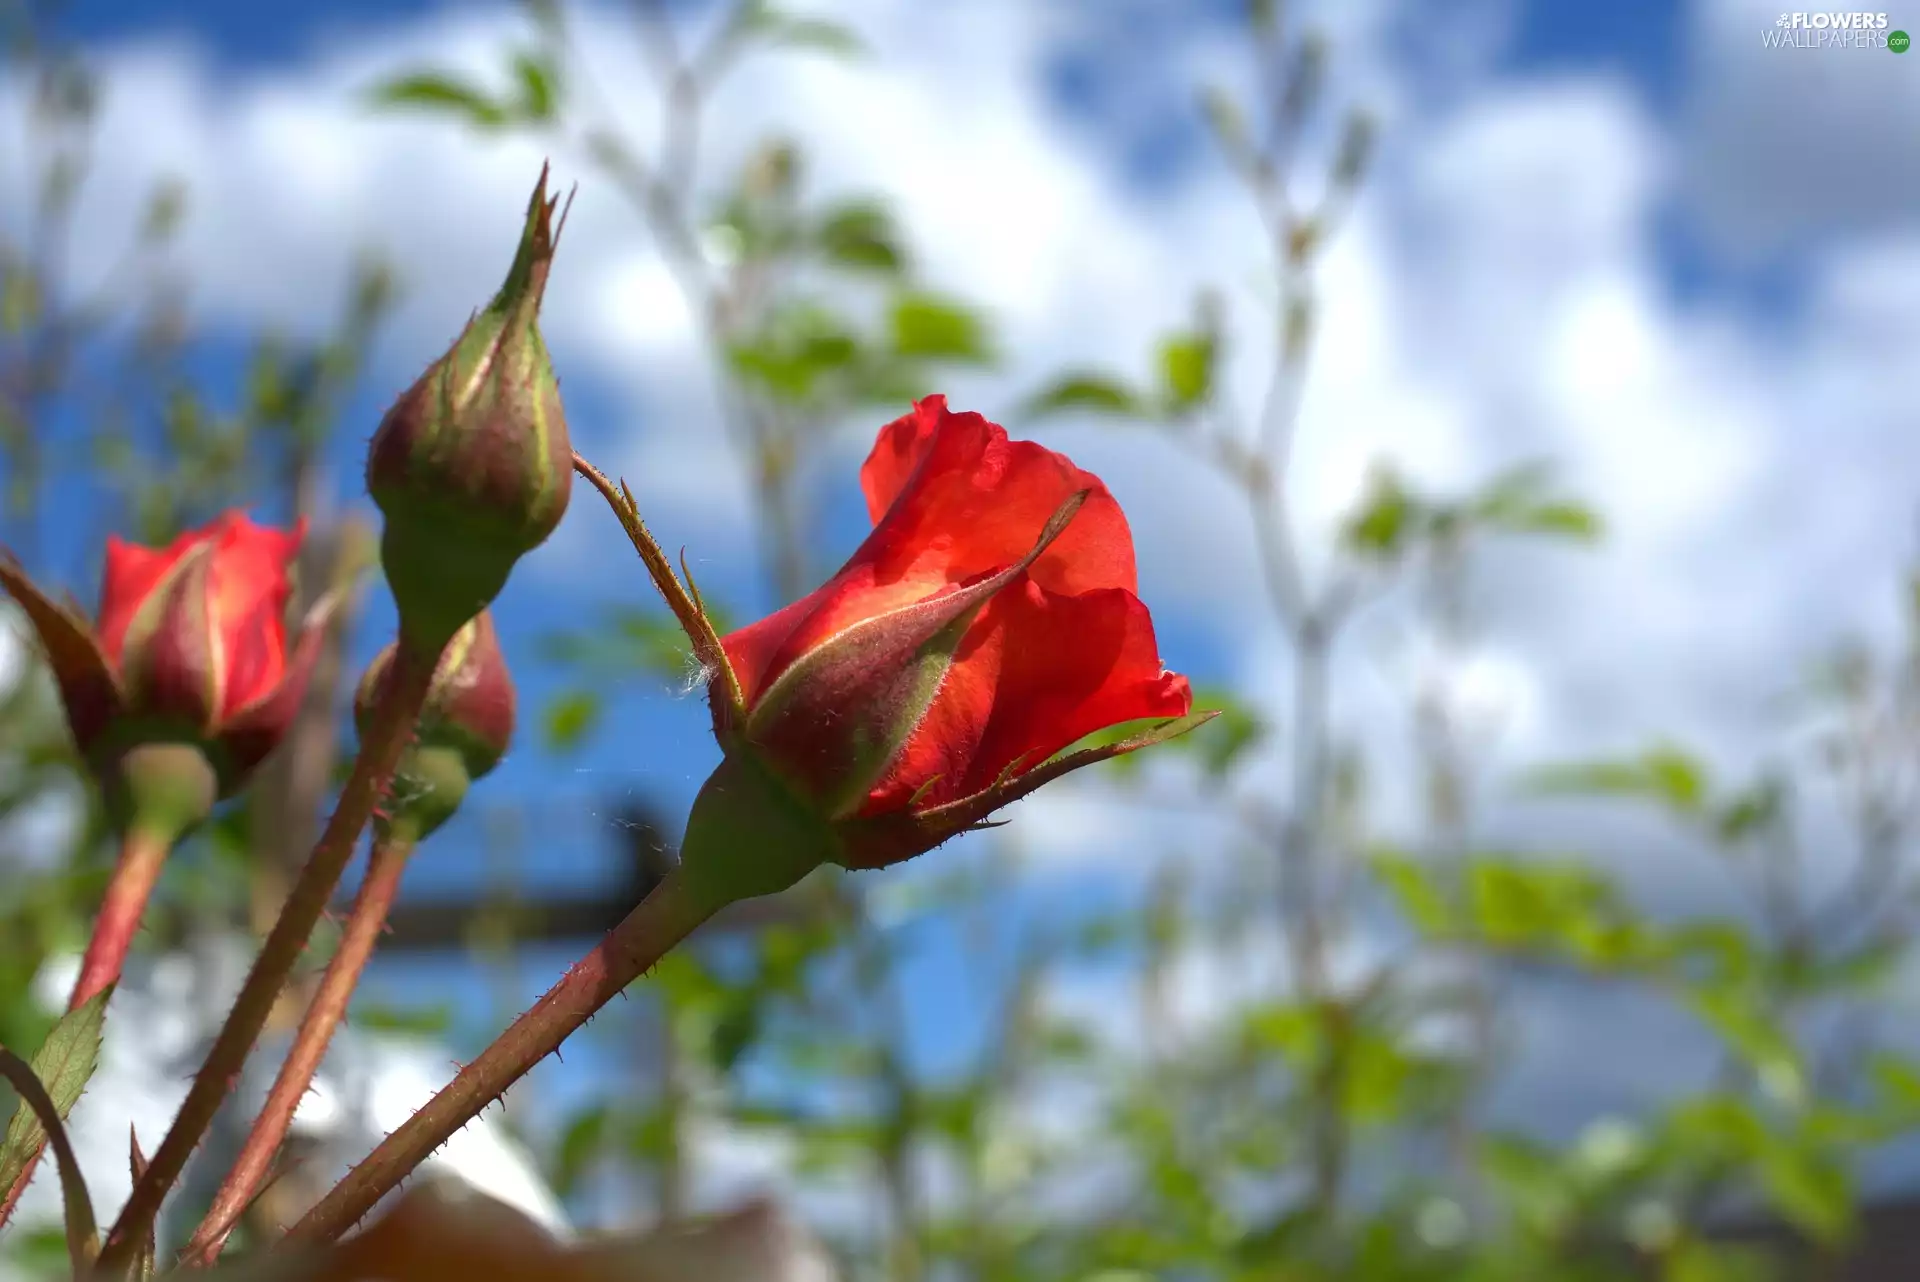 Red, Buds, blurry background, roses